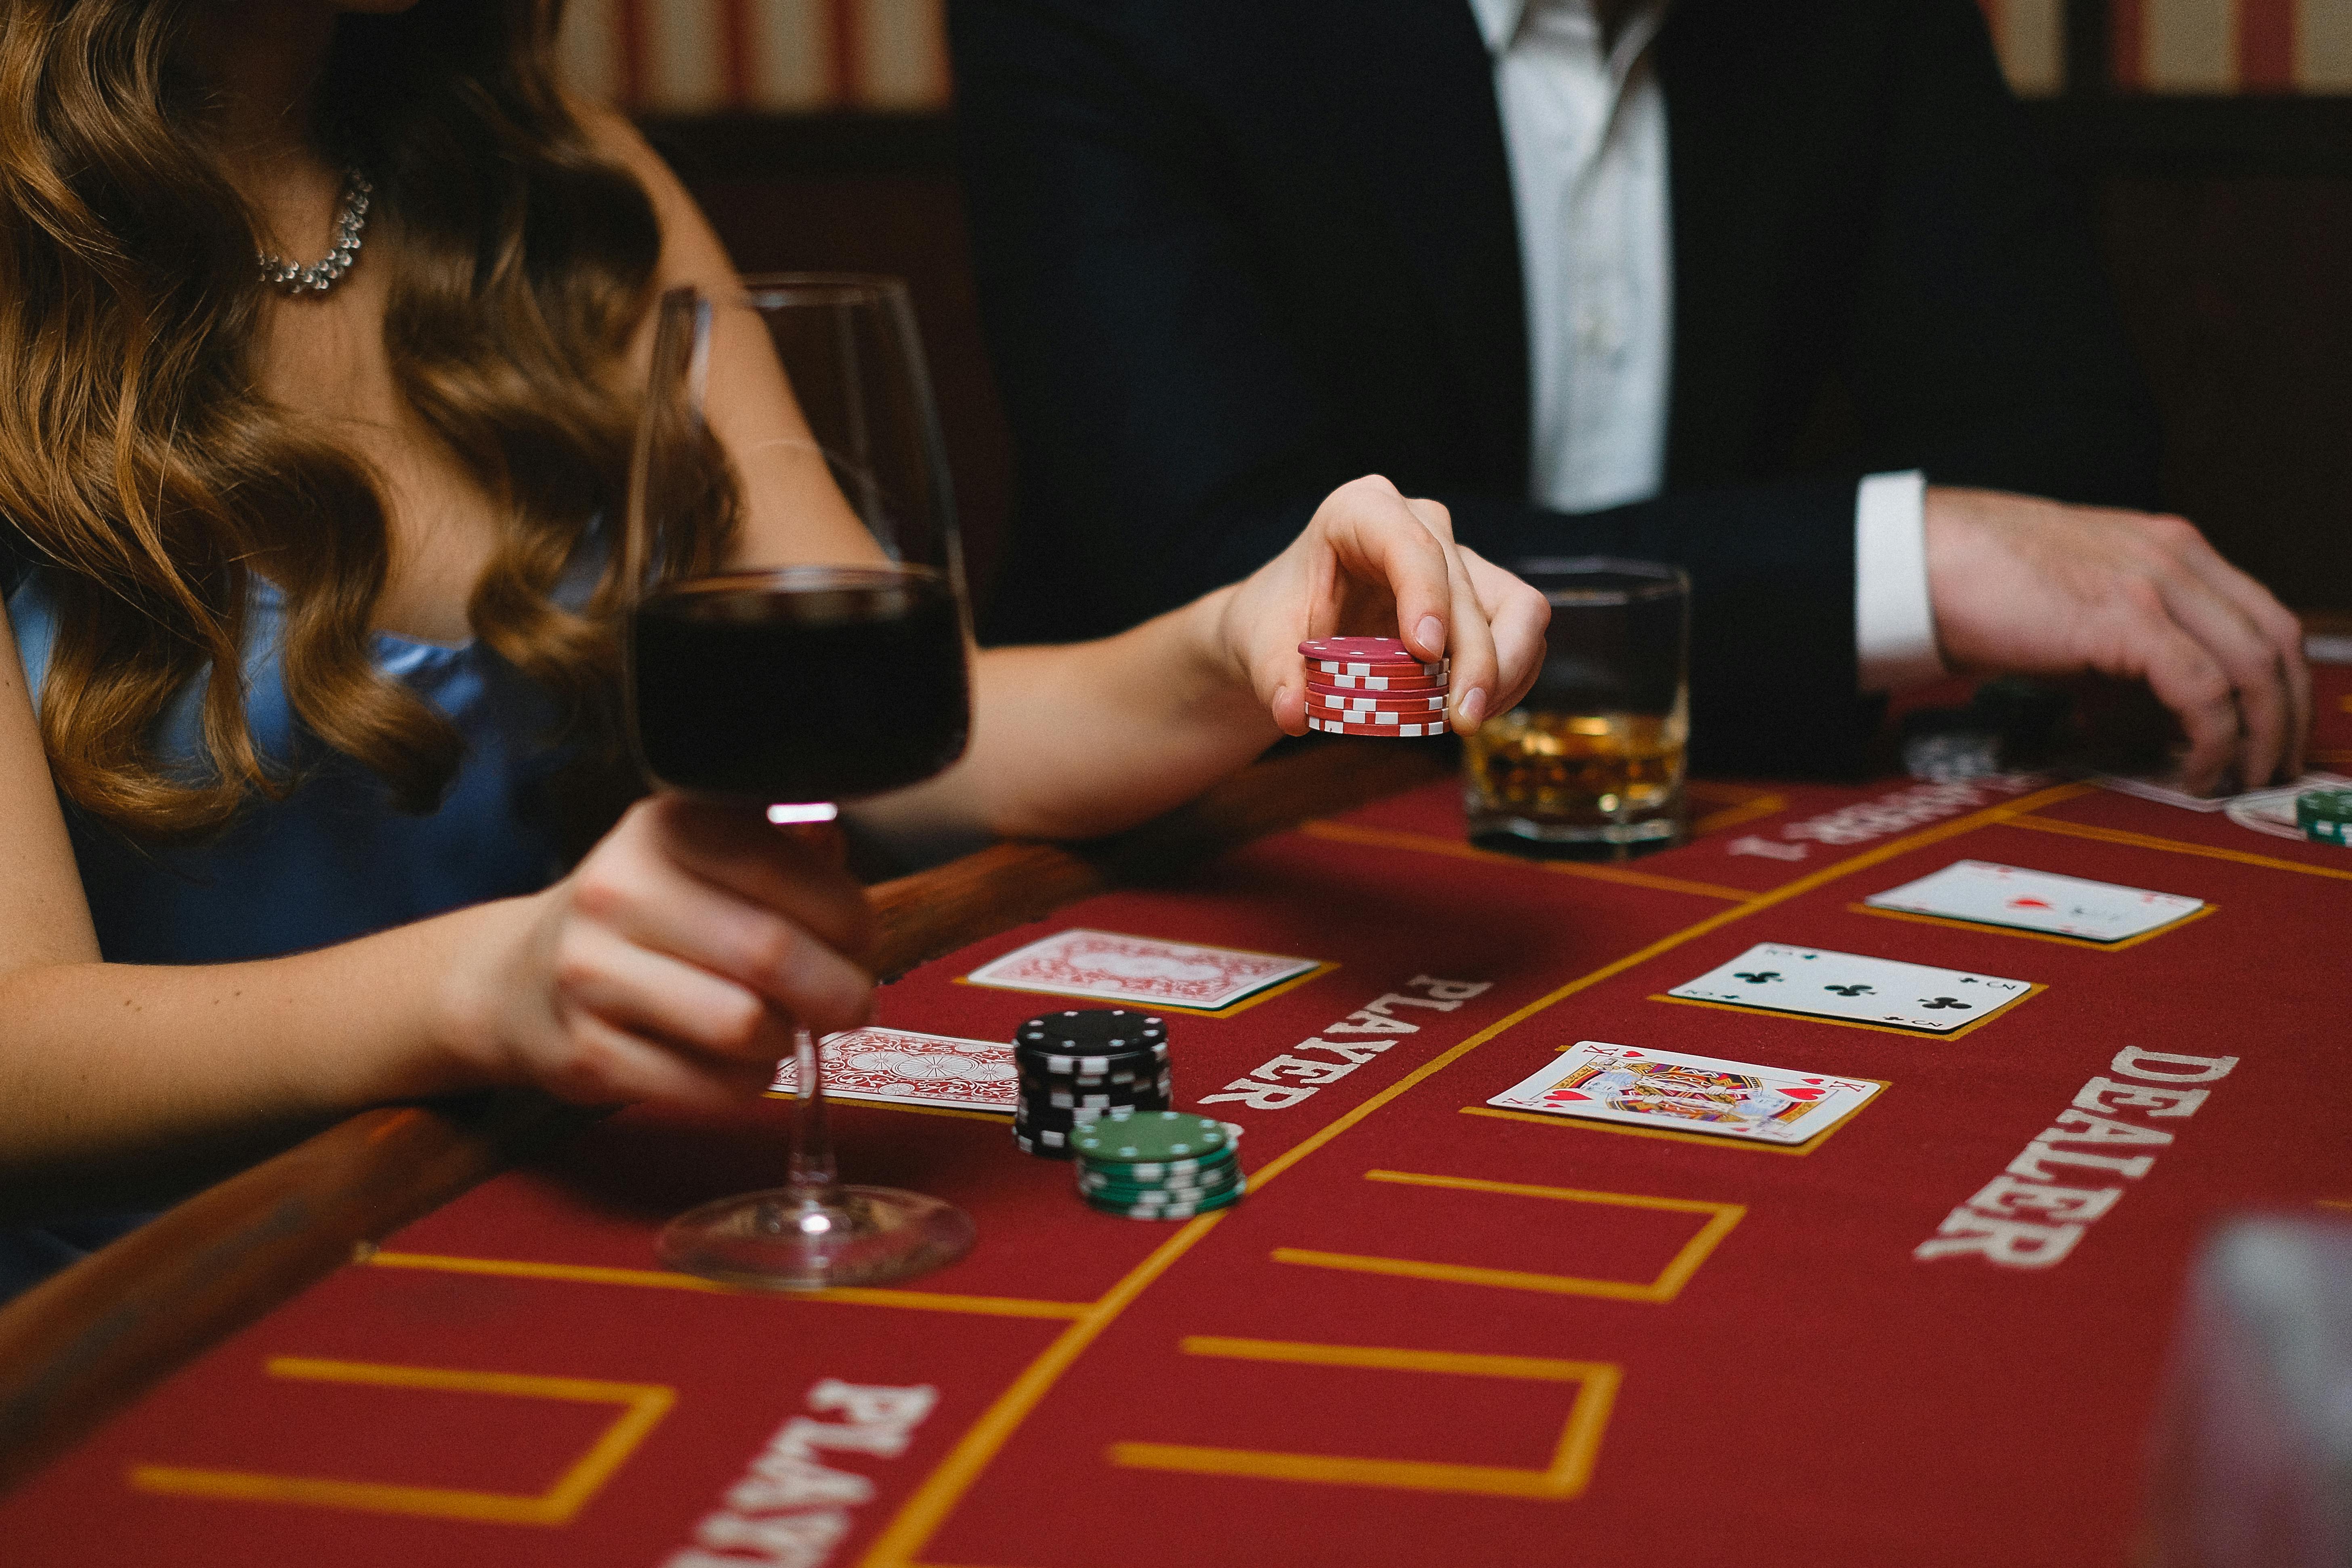 Unlicensed vs. Licensed Casinos: Pros and Cons